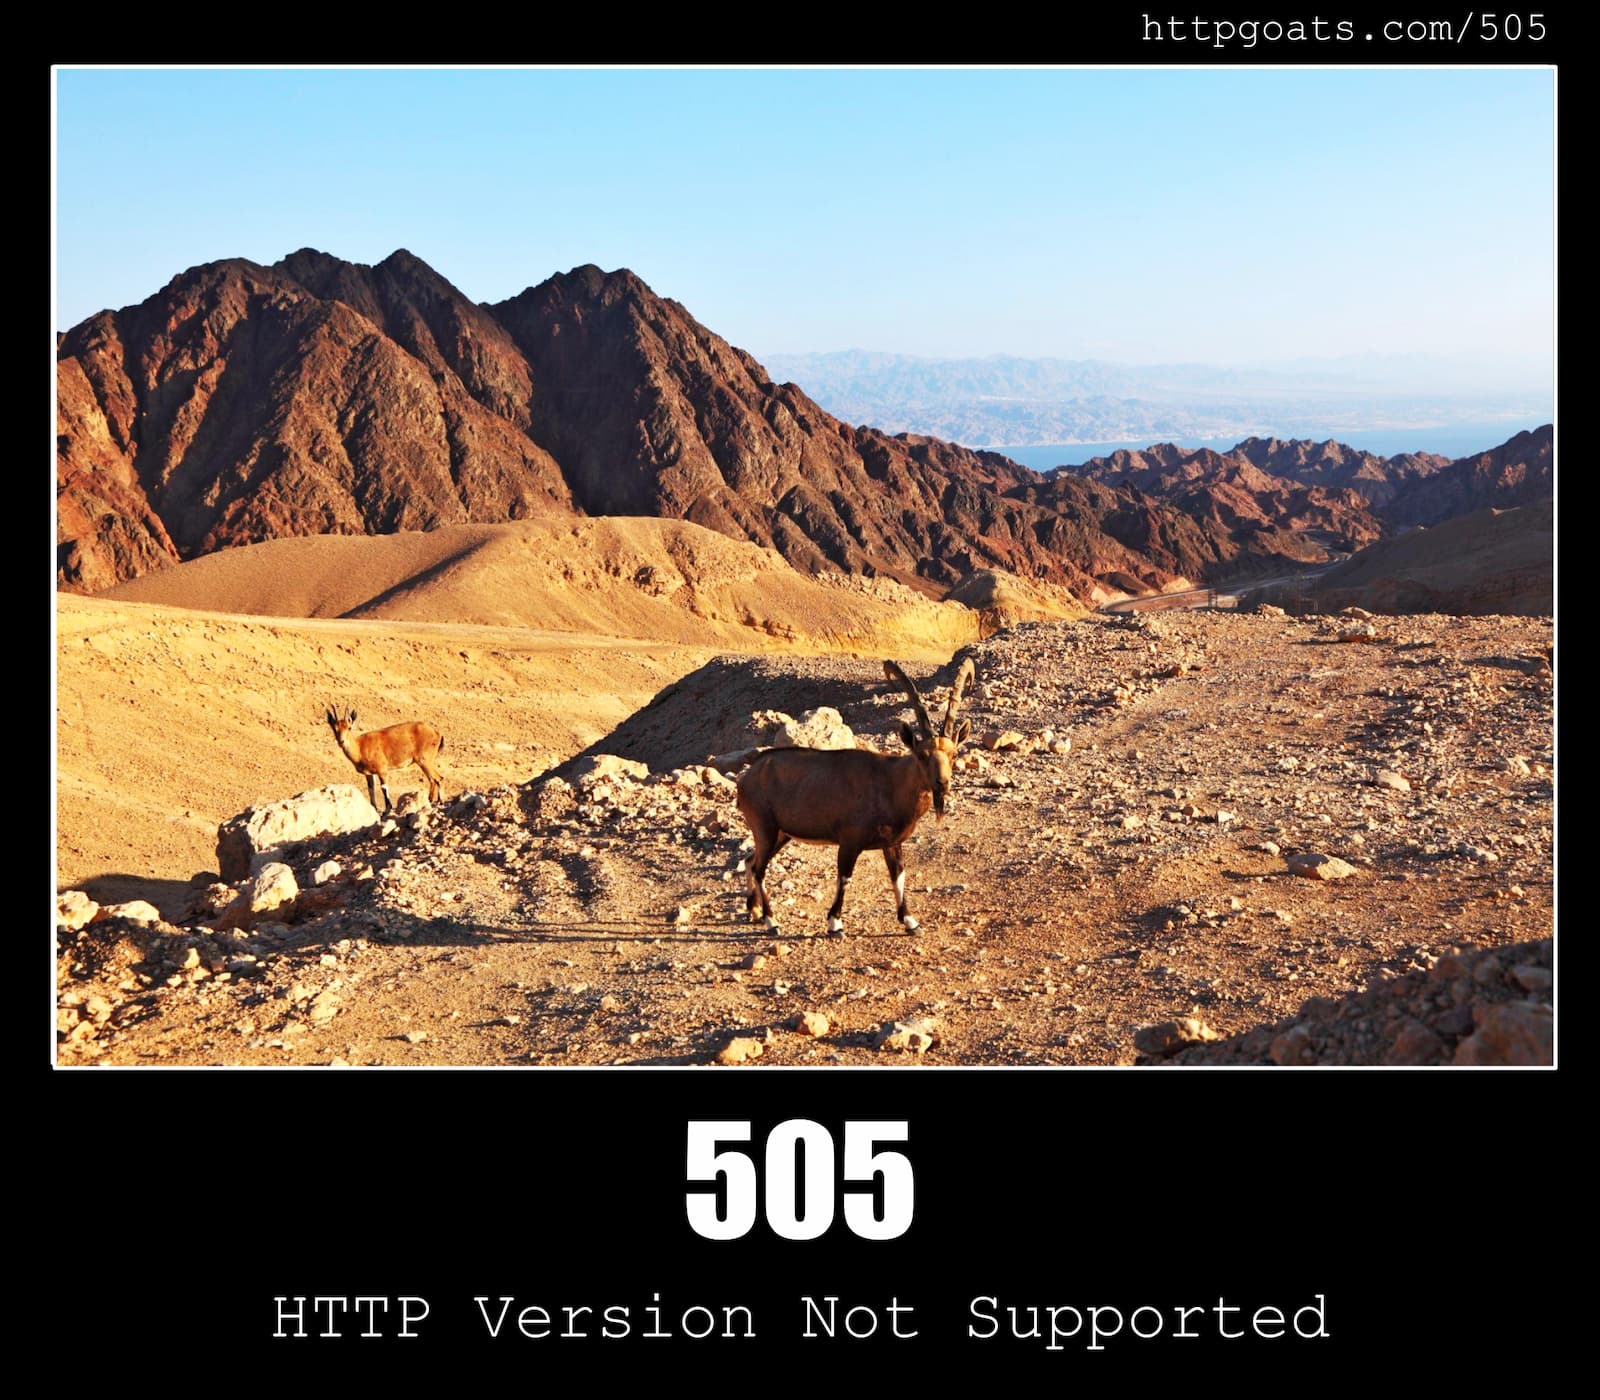 HTTP Status Code 505 HTTP Version Not Supported & Goats